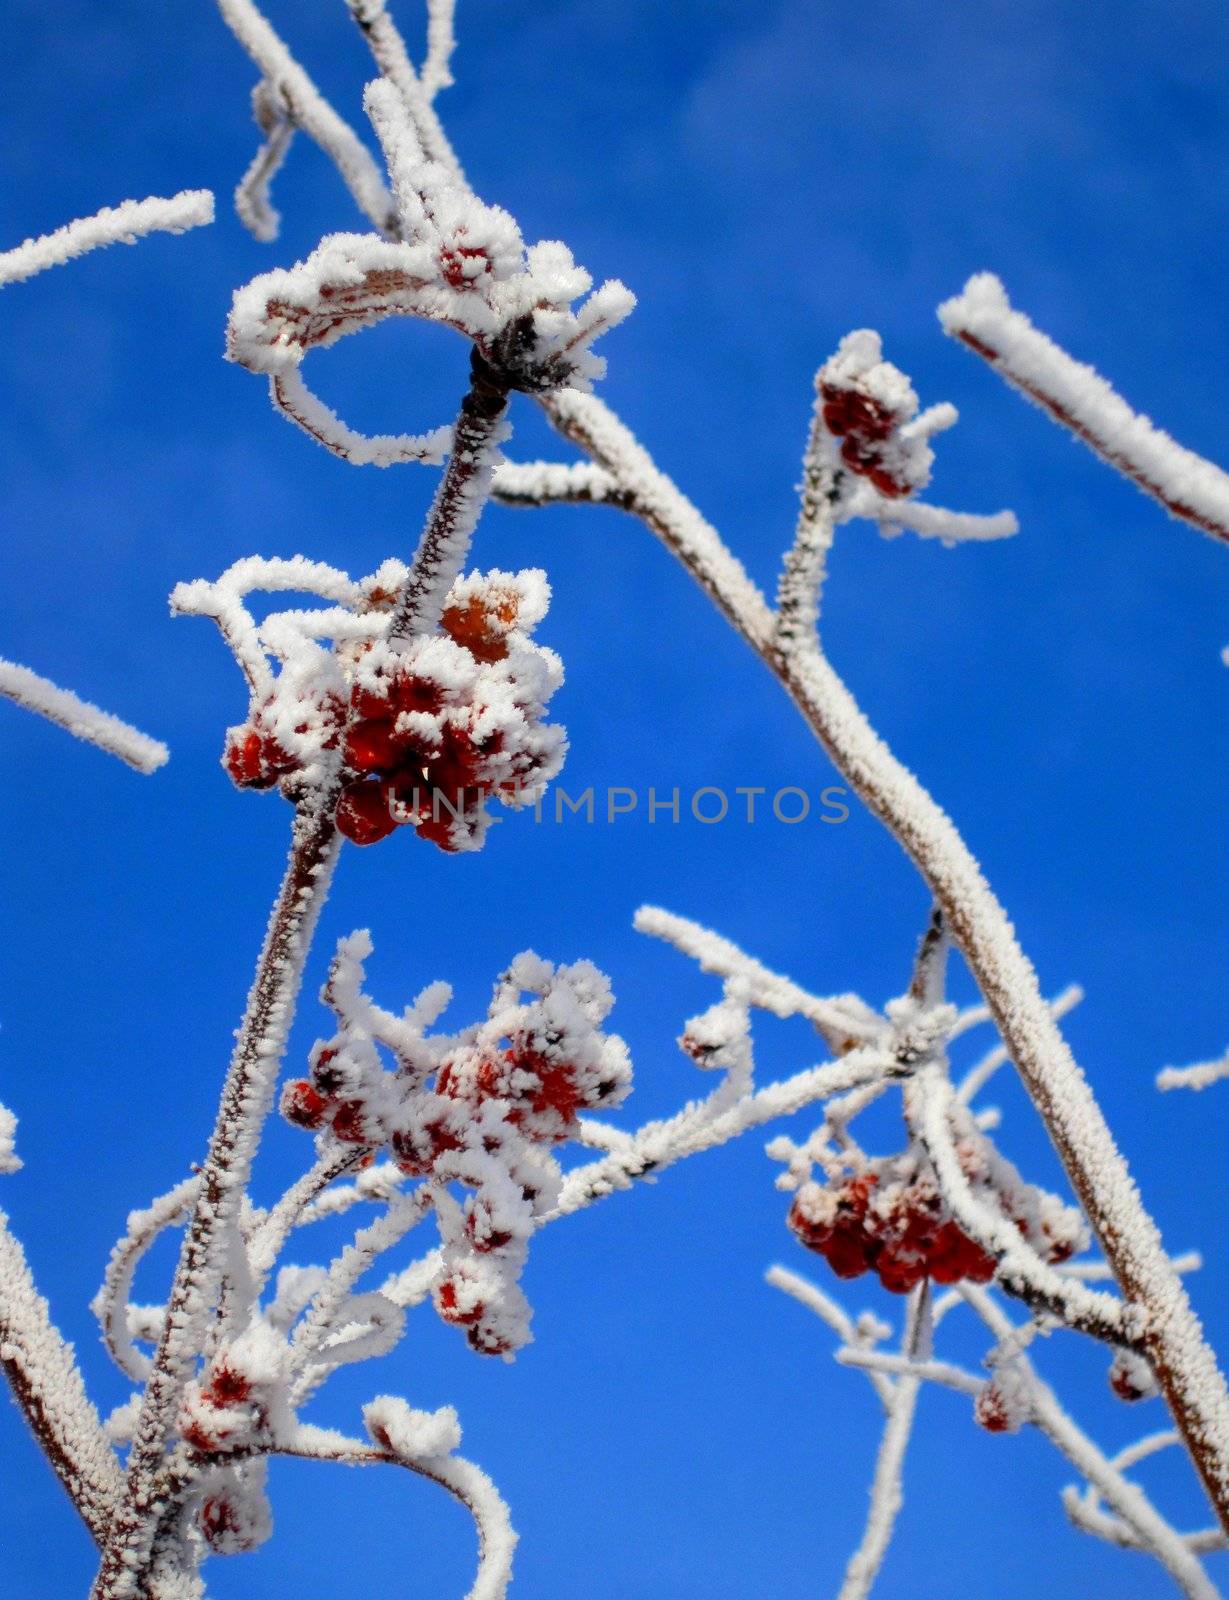 Red berried tree covered in hoar frost under a blue sky.